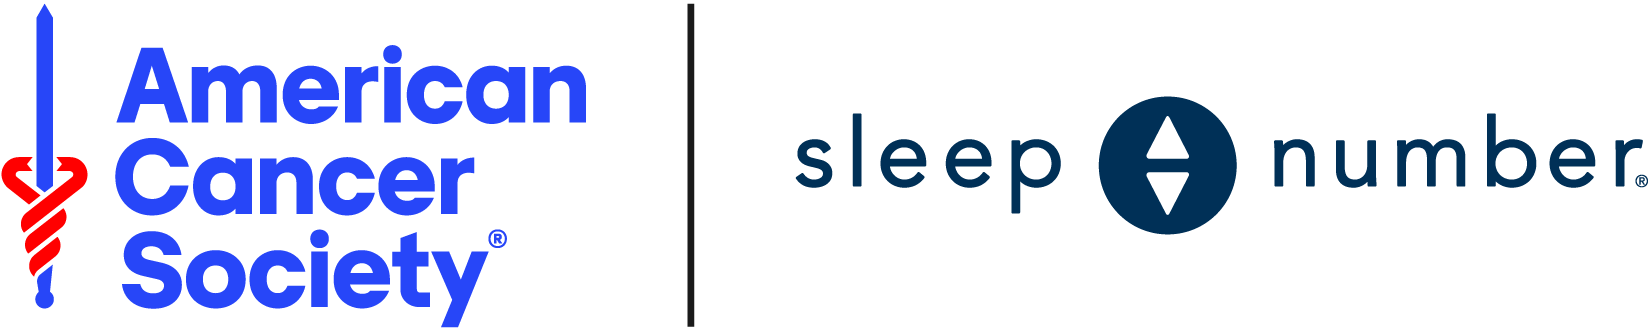 American Cancer Society and Sleep Number logo